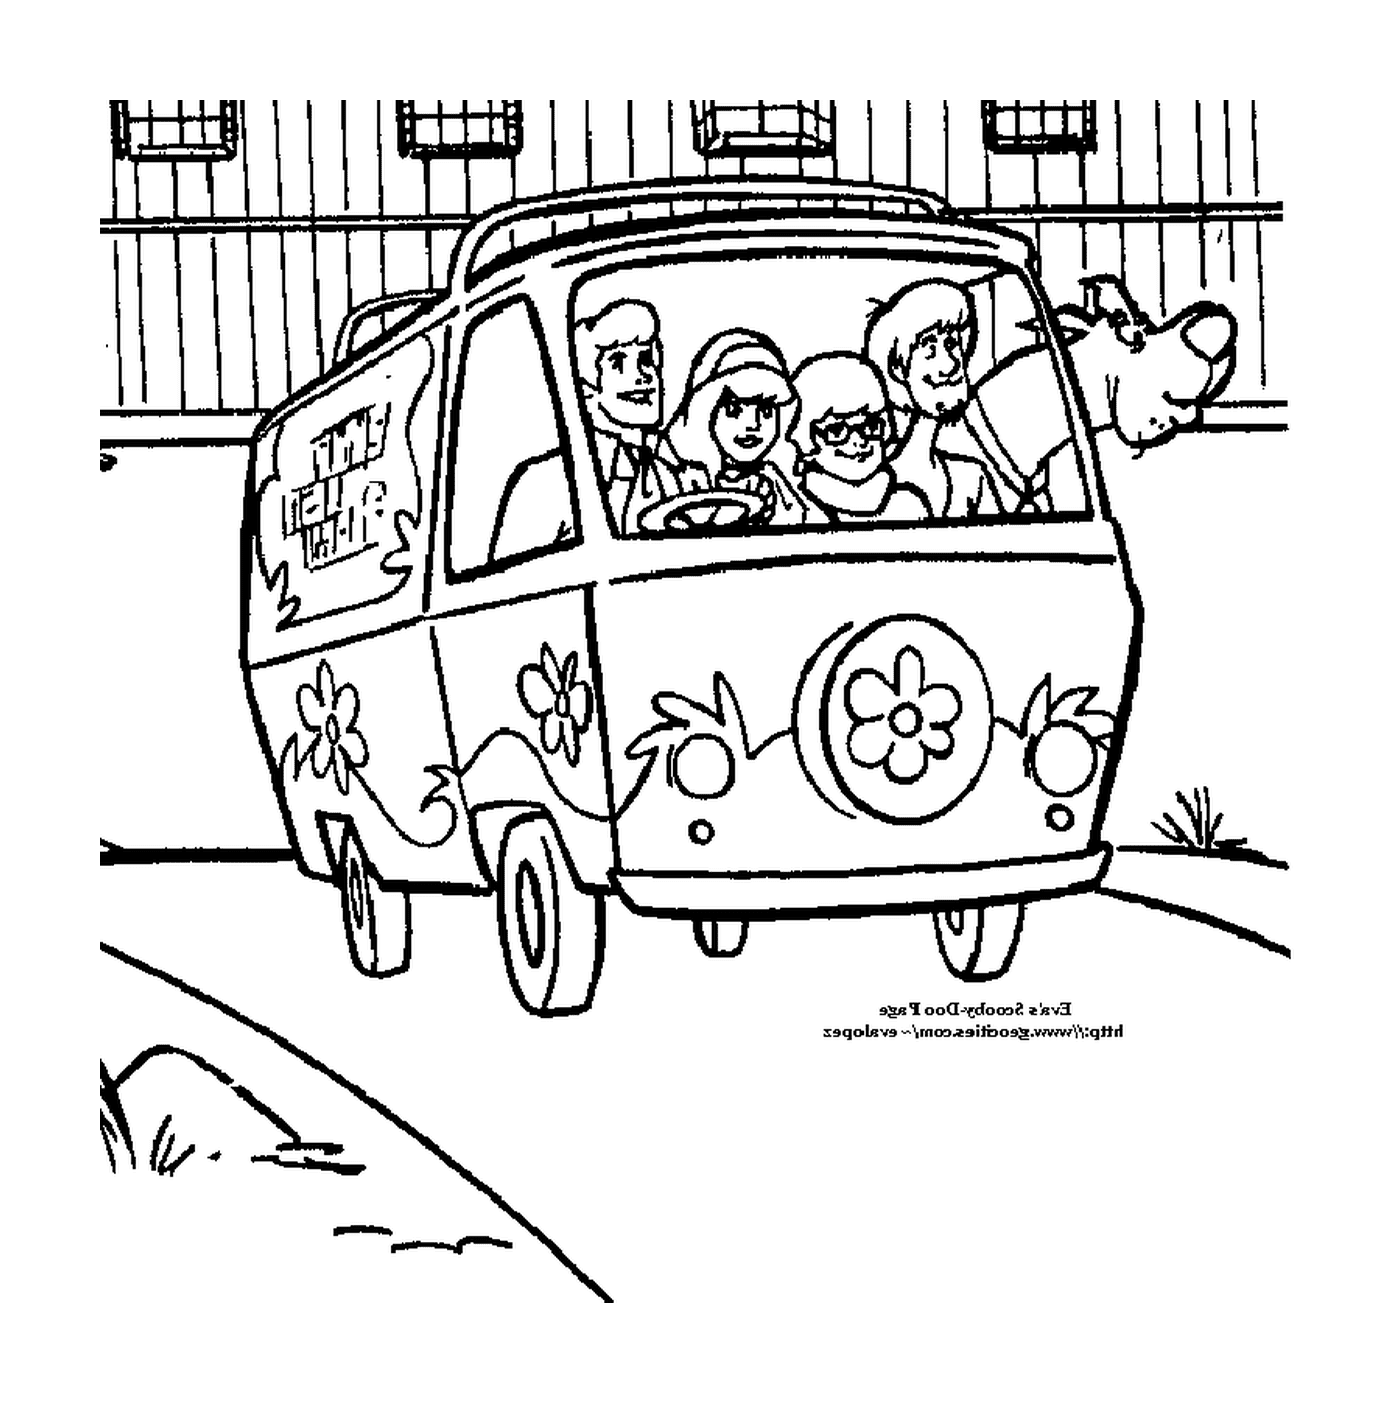  A van with people inside 